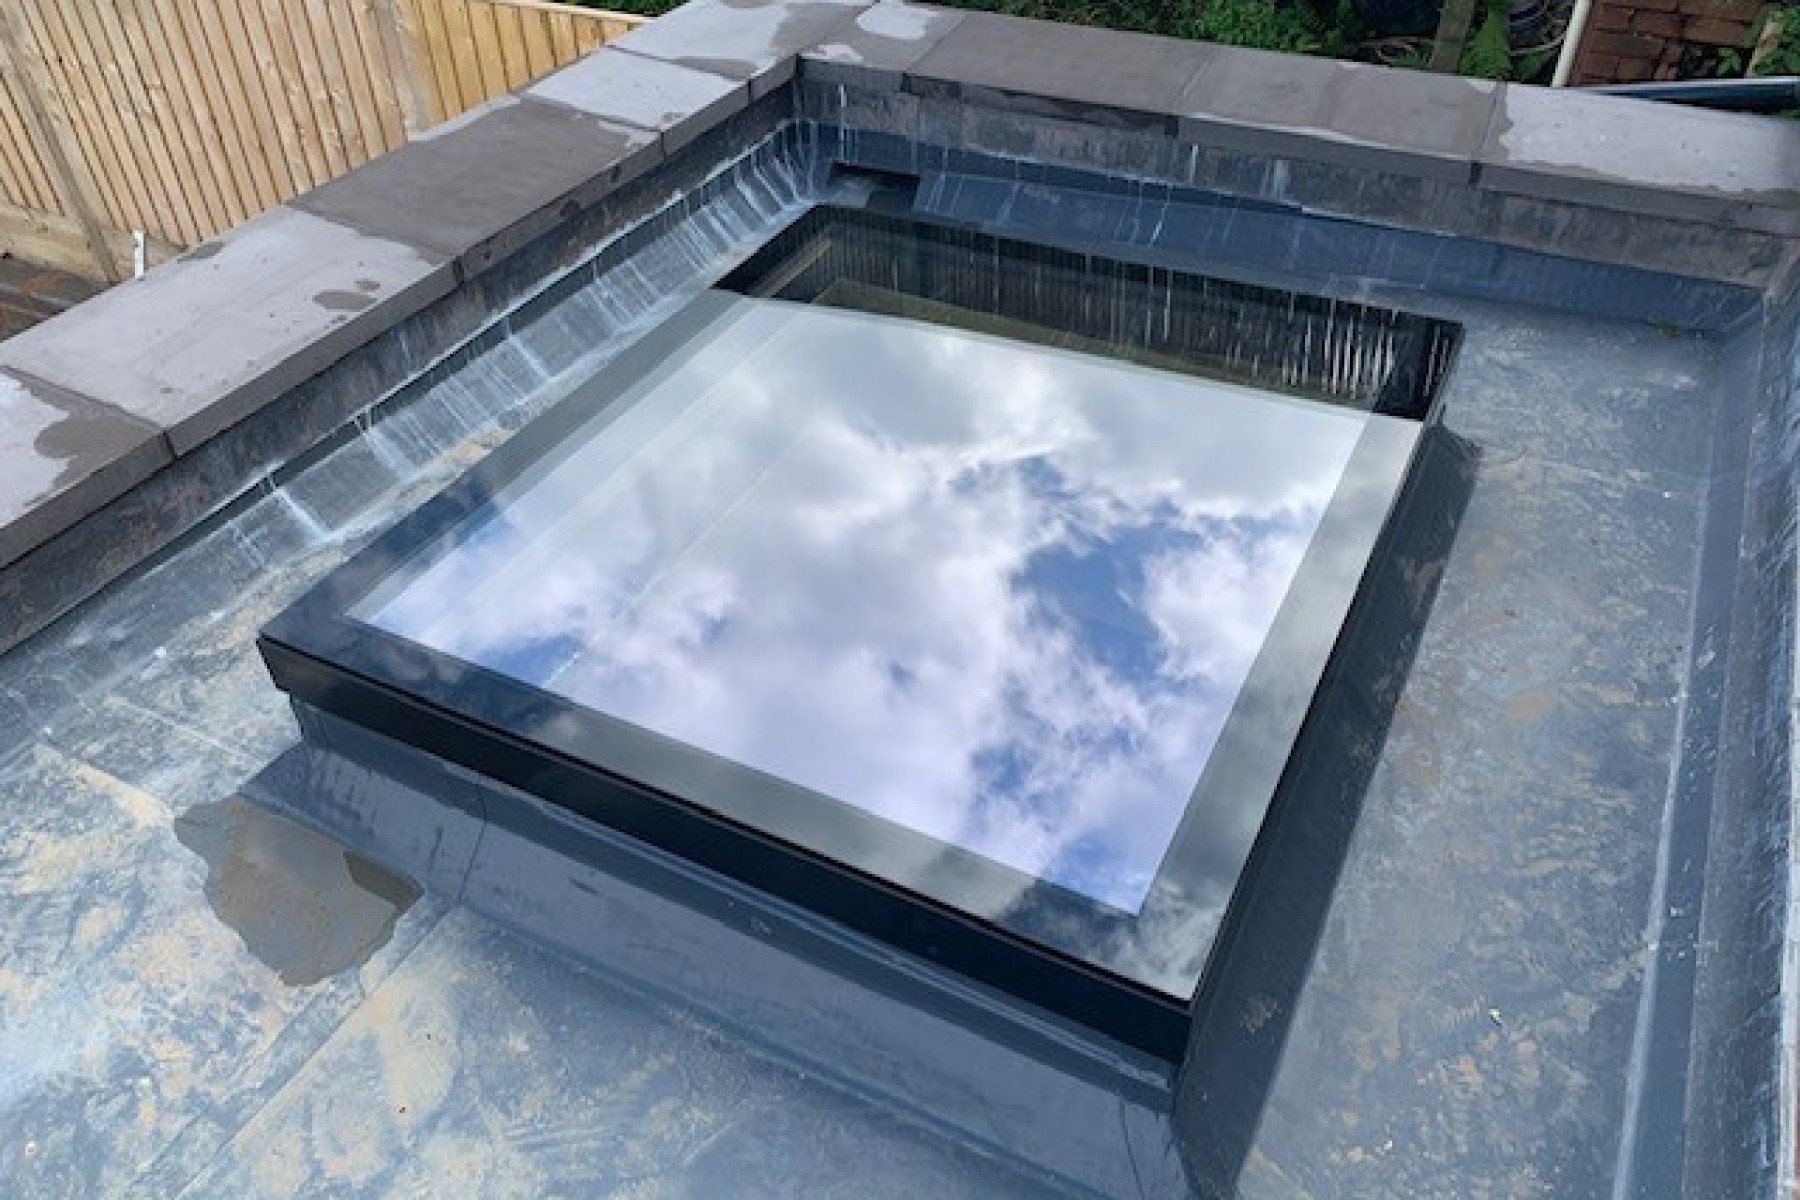 Replace your old conservatory roof with a ultraframe flat roof